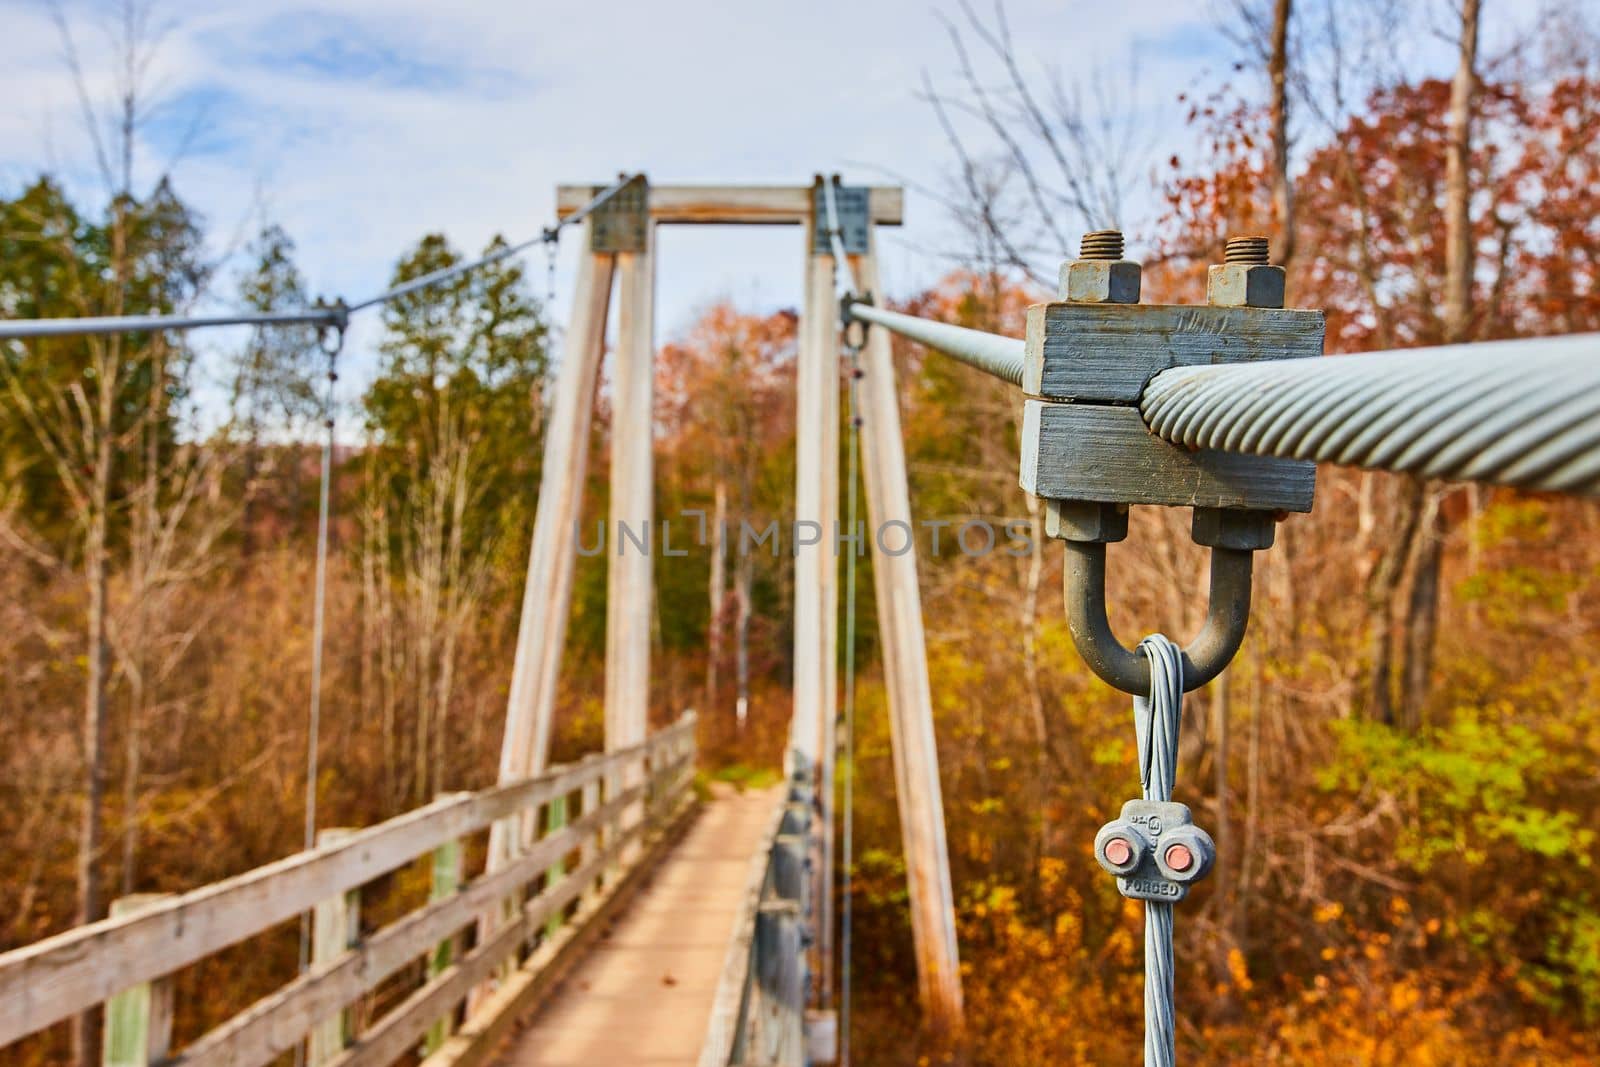 Detail of support ropes for large suspension bridge leading into fall forest by njproductions